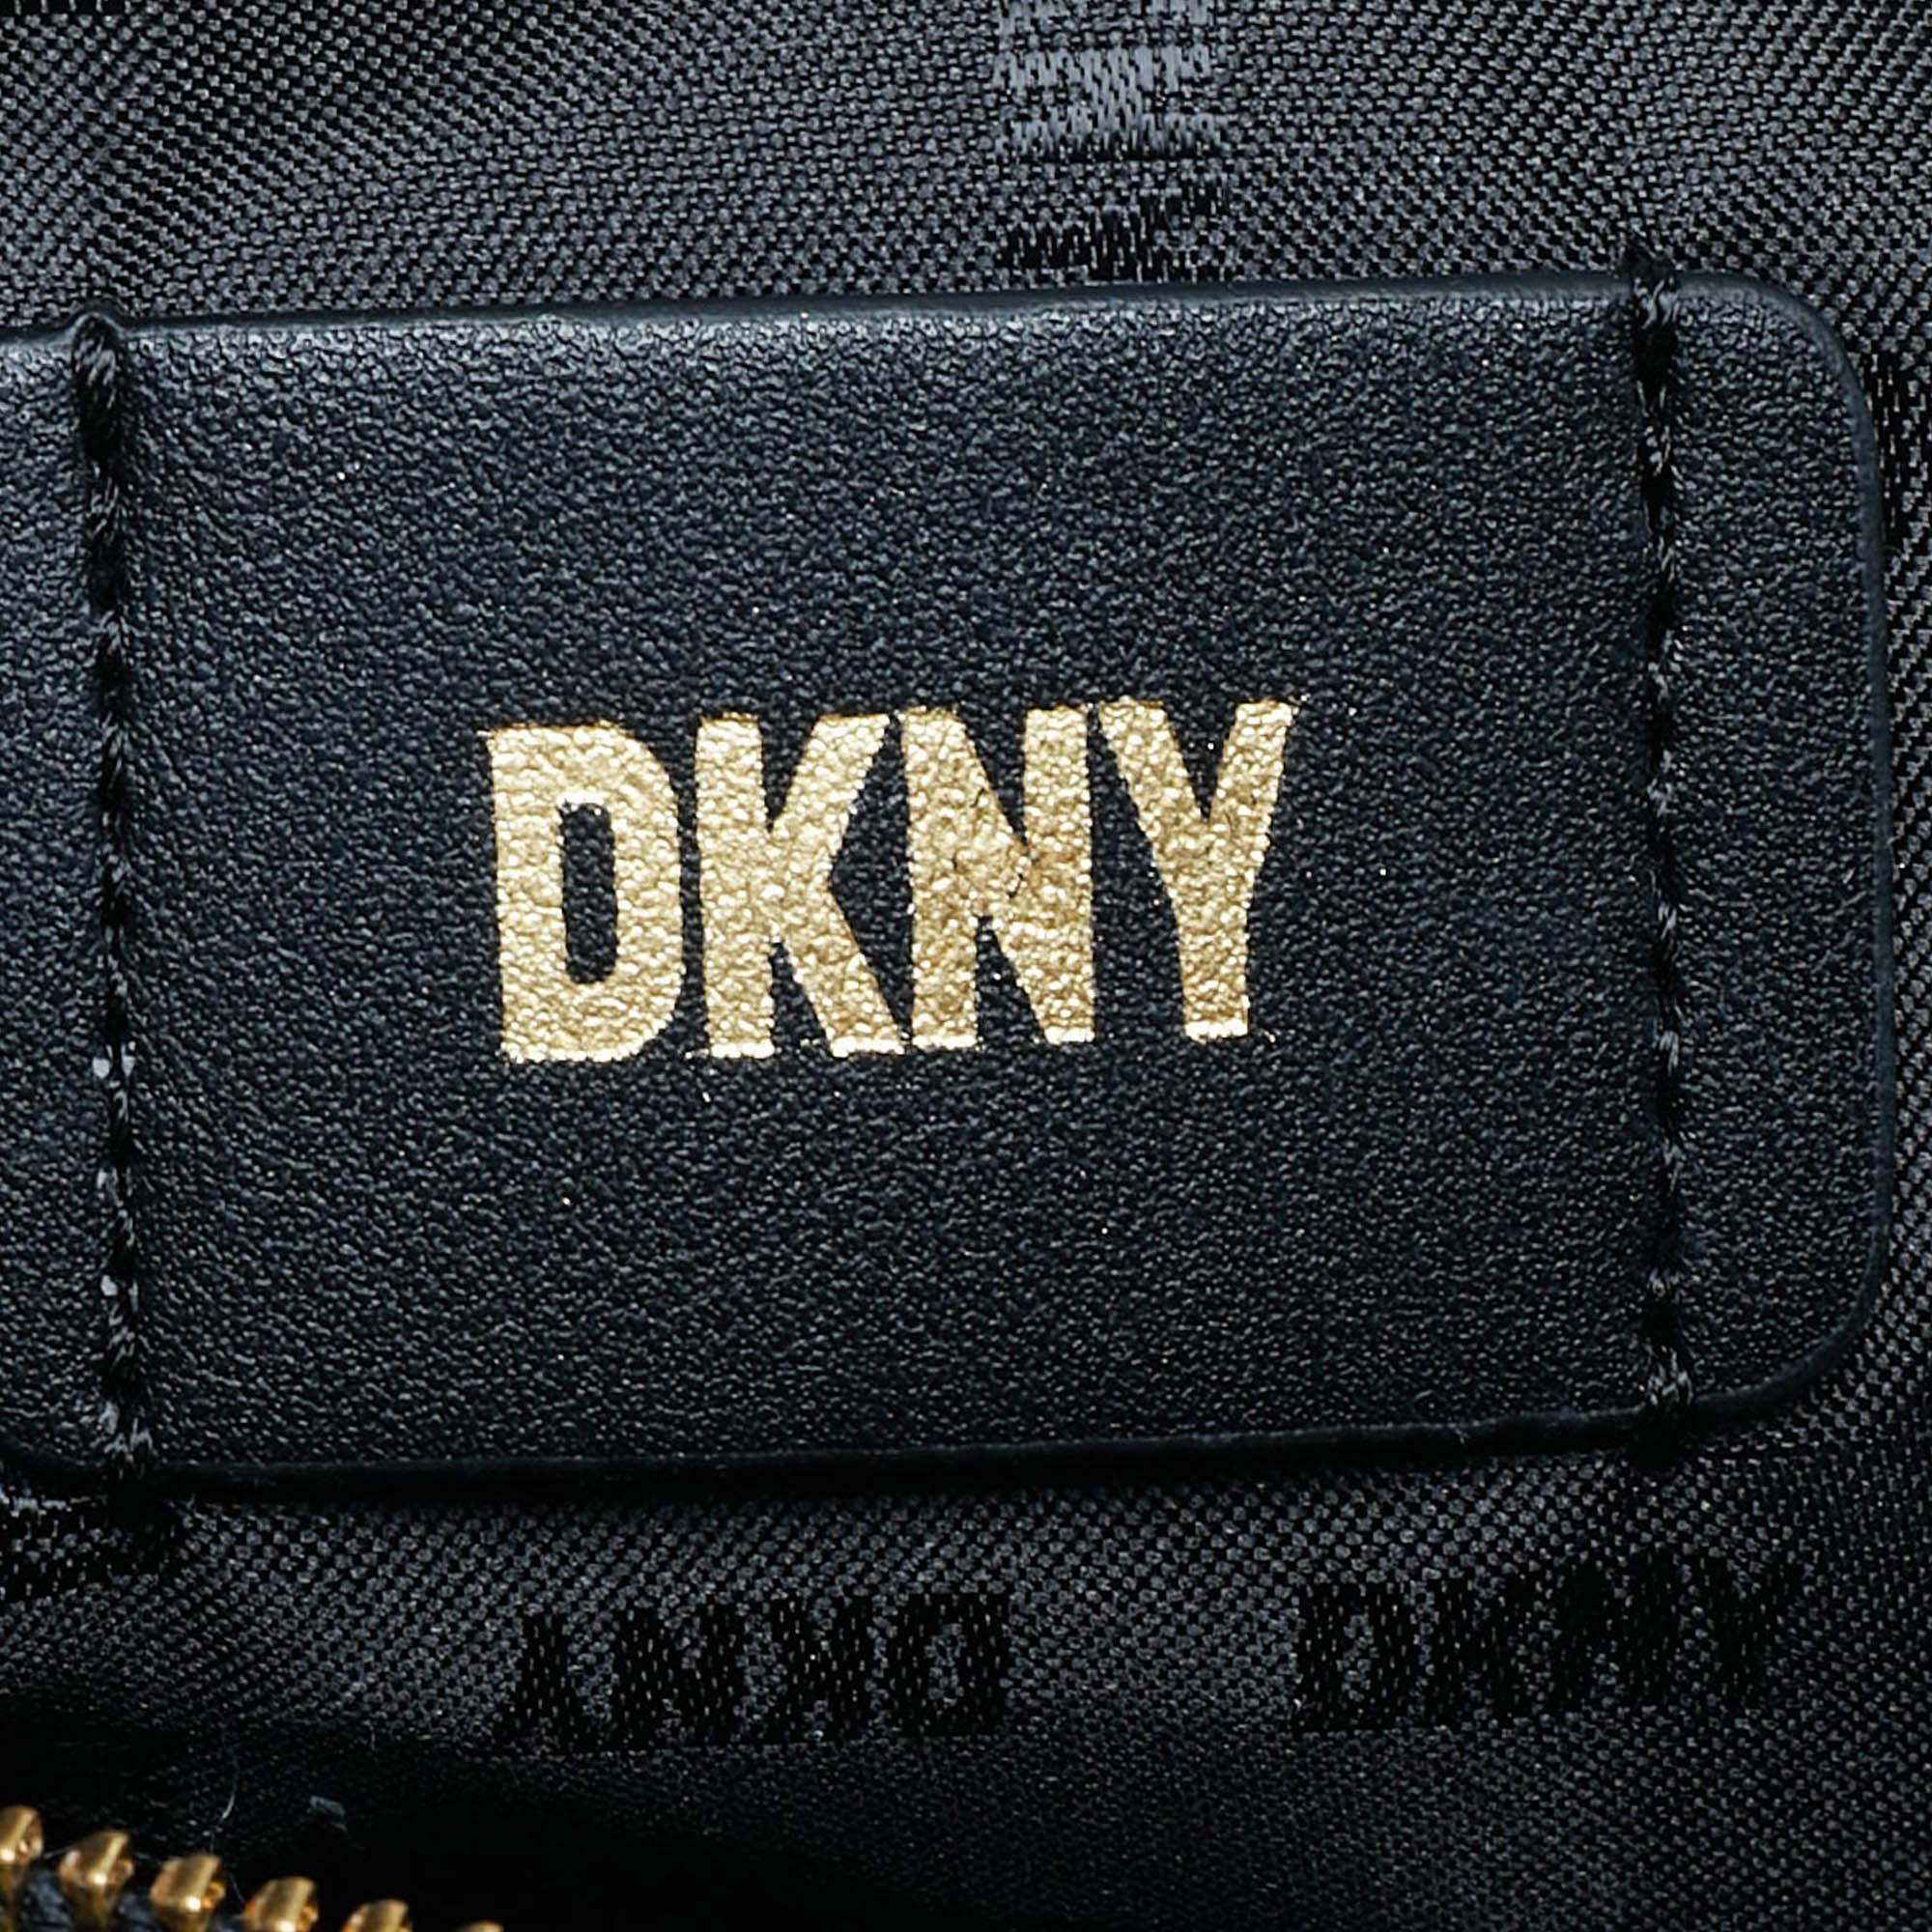 DKNY Black Signature Canvas and Leather Ewen Studded Satchel 3